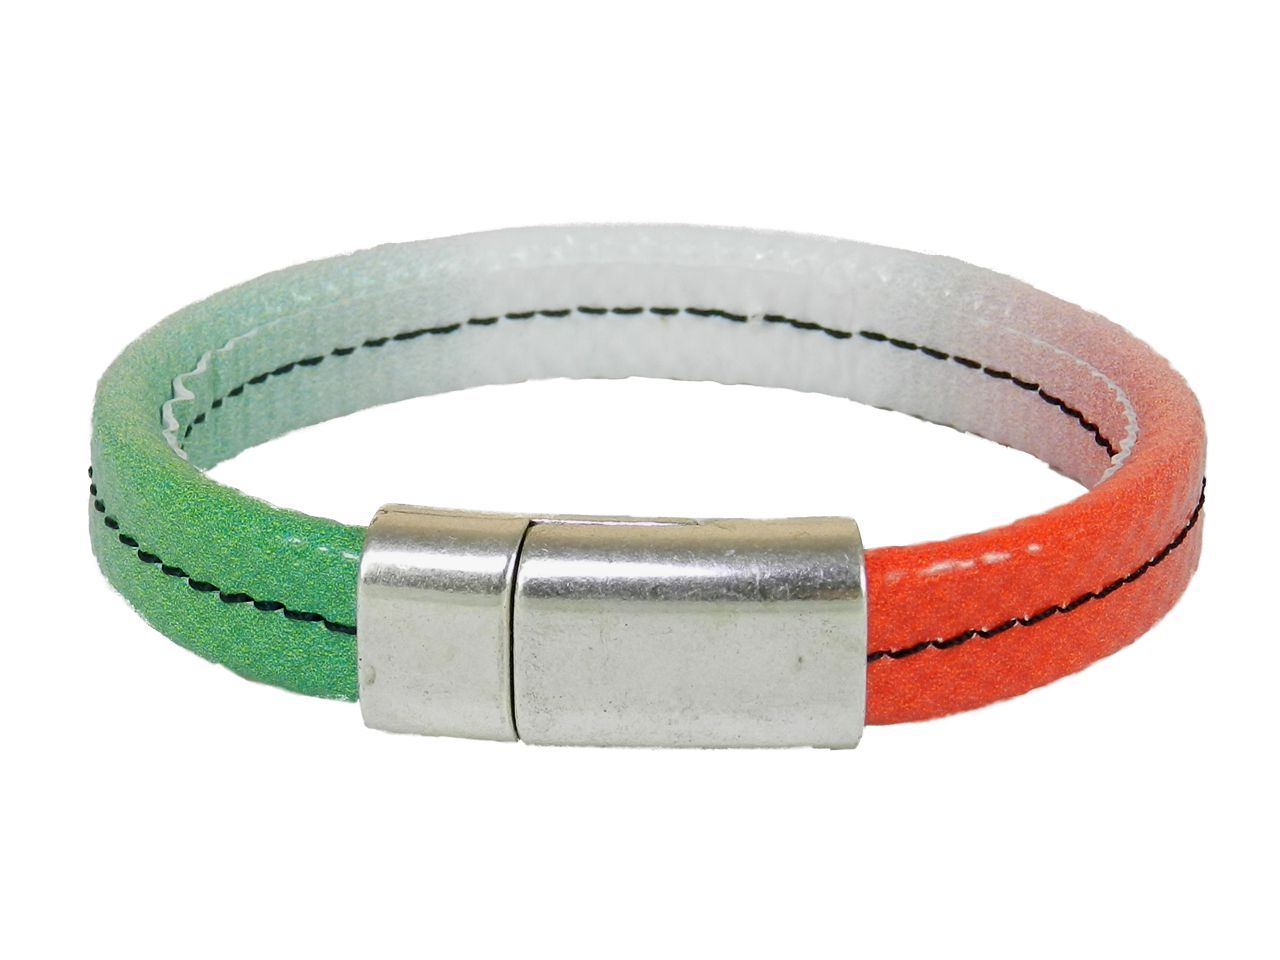 WOMAN'S BRACELET I AM DOPING FREE BY PAUL MECCANICO WITH ITALIAN FLAG. - Limited Edition Paul Meccanico